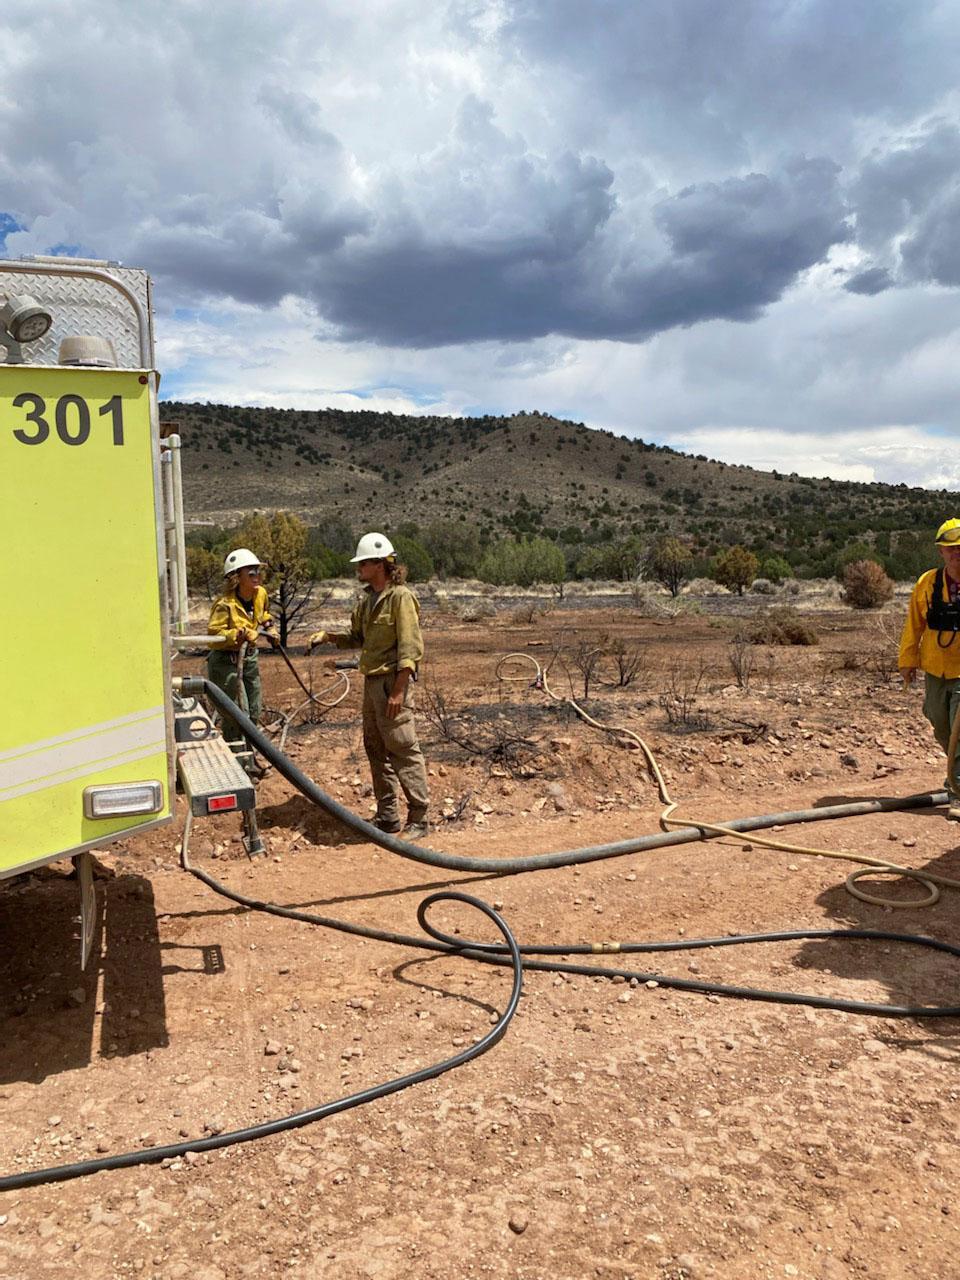 Fire crews in yellow shirts green pants white helmets, personal protective equipment talk logistics by a yellow wildland fire truck